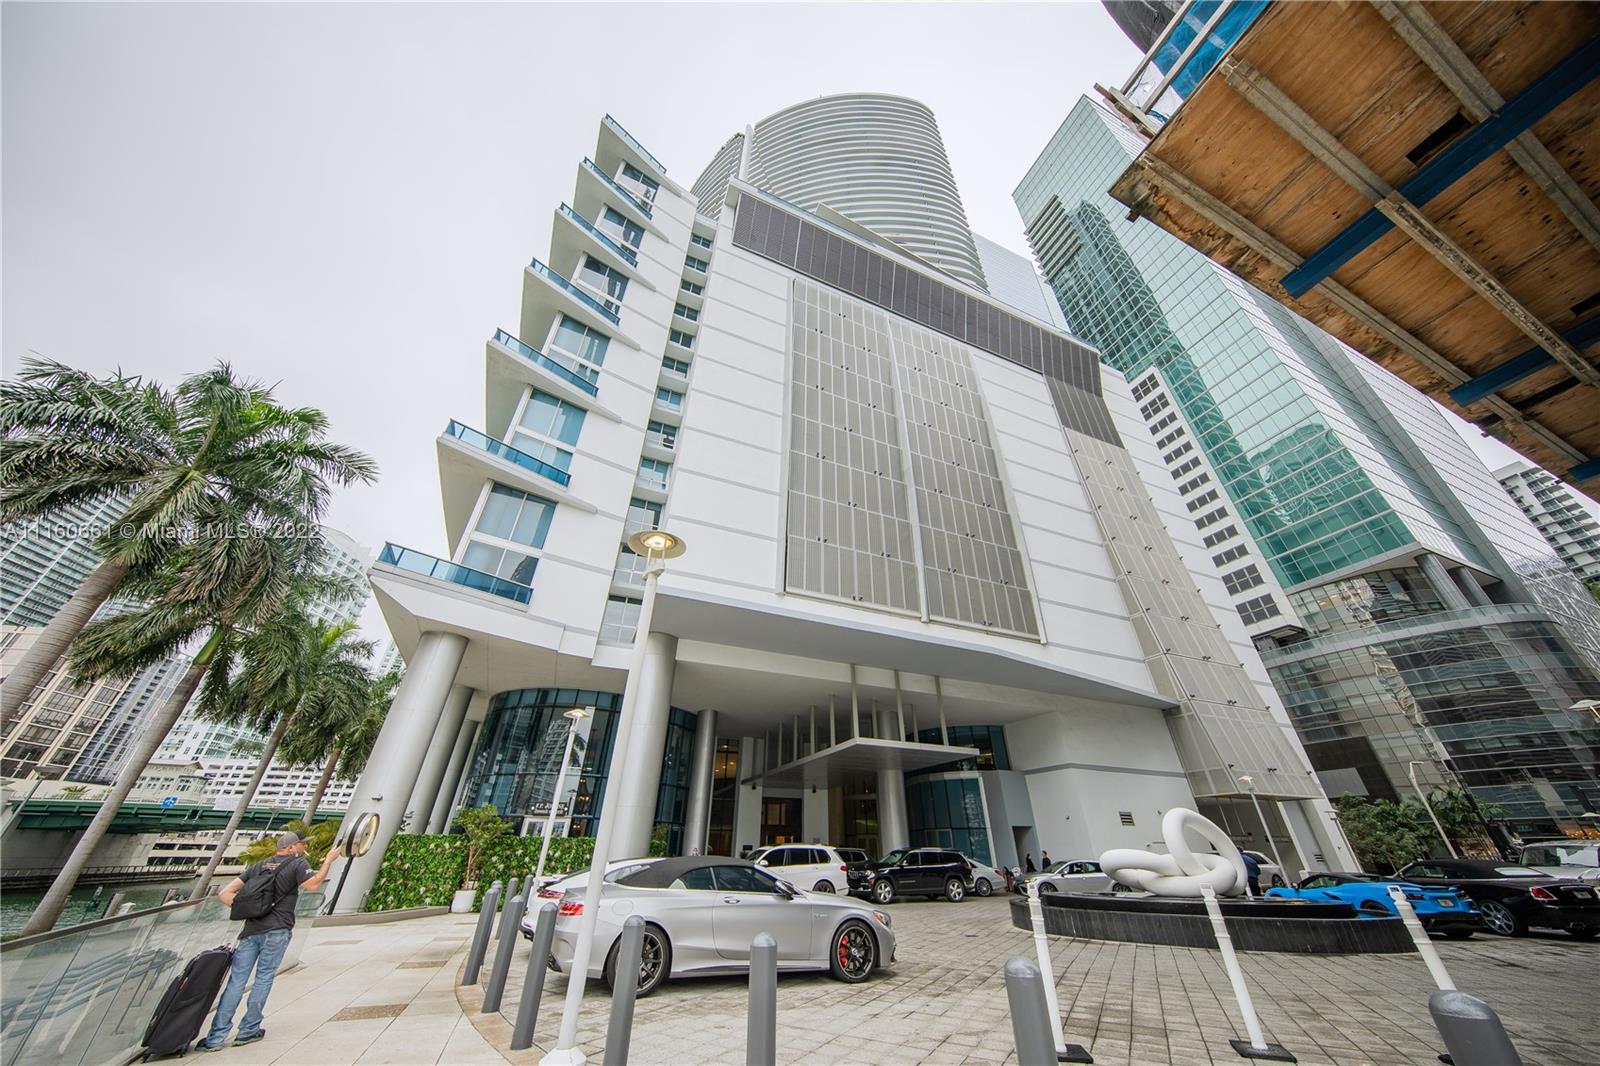 Stunning 2 bedrooms and 2.5 baths unit with Bay, Brickell Avenue and City views from its three terraces!! Excellent amenities, gym, massage room, retails, sauna, yoga, pools and bar. Valet parking for guests and owners....if you see you buy!!!!!!